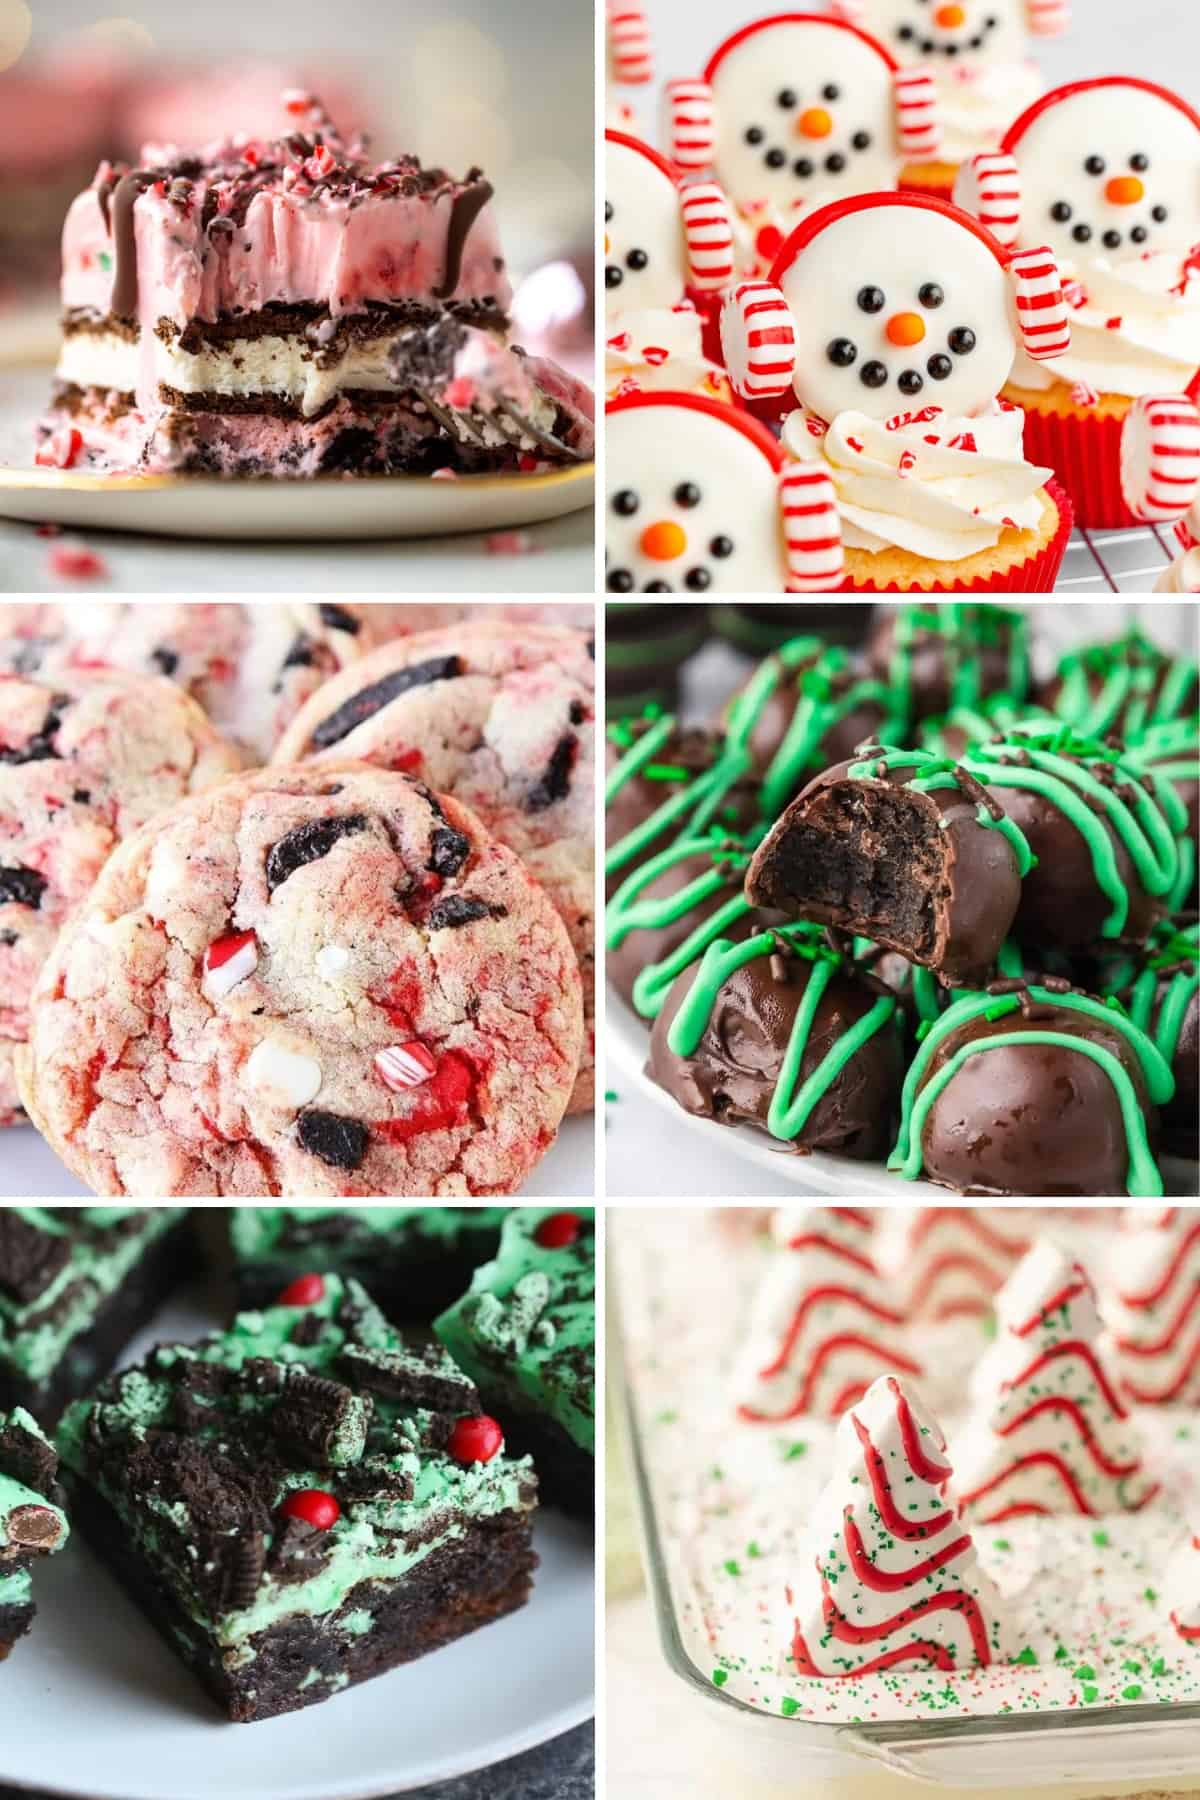 Peppermint Oreo ice cream cake, mint brownies and other Oreo Christmas recipes in picture collage.